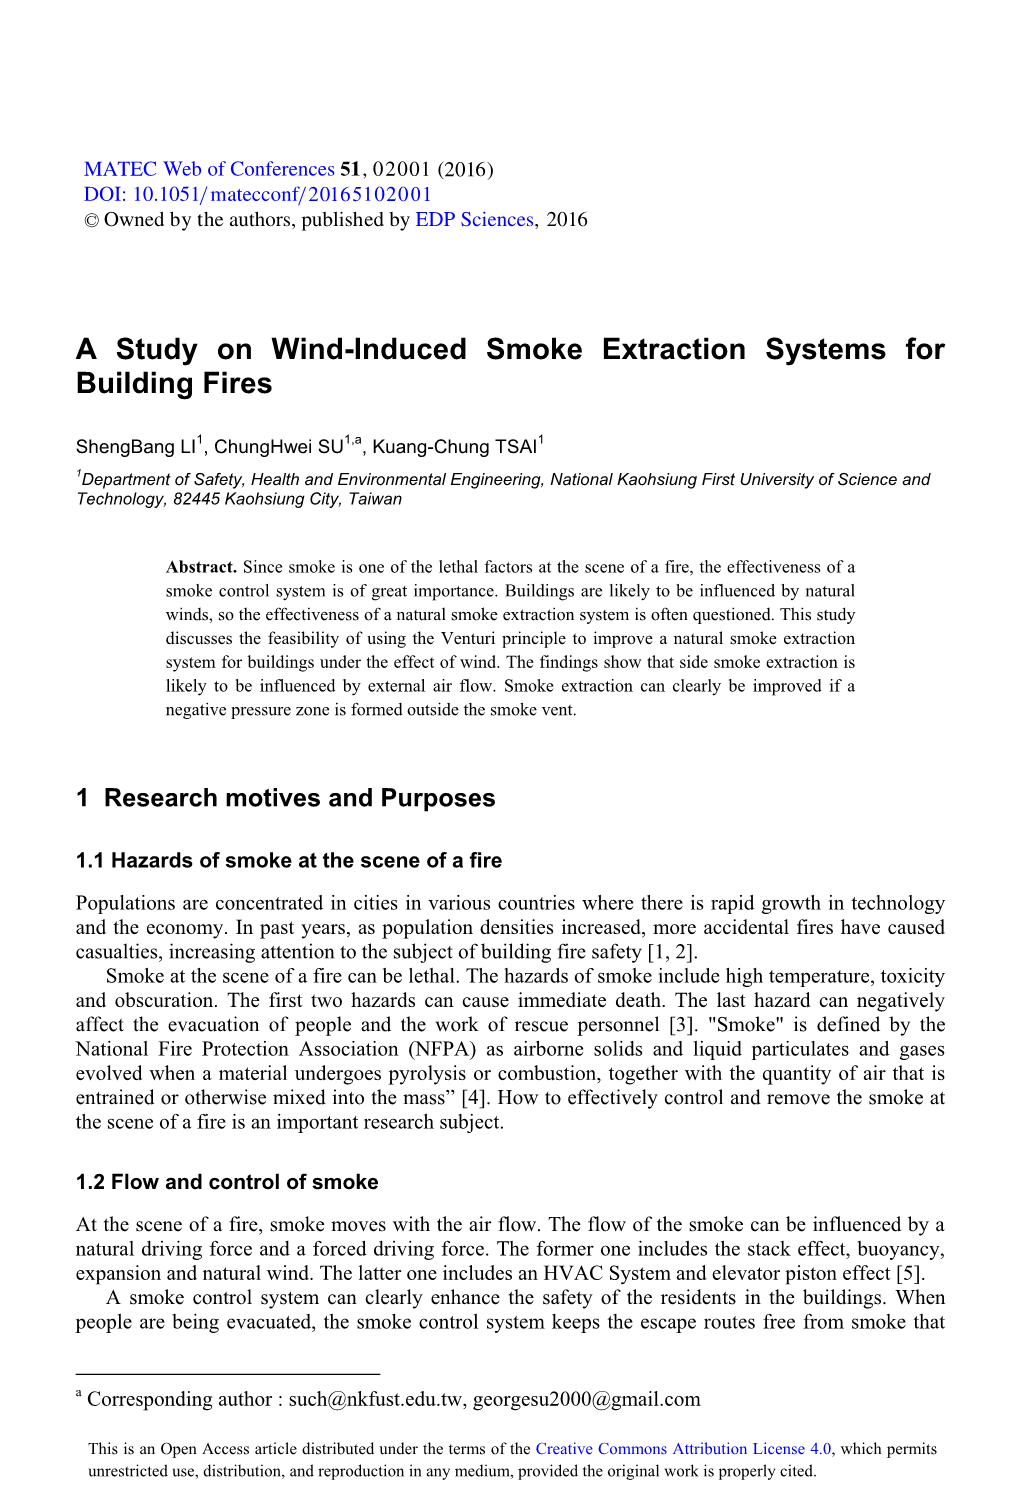 A Study on Wind-Induced Smoke Extraction Systems for Building Fires